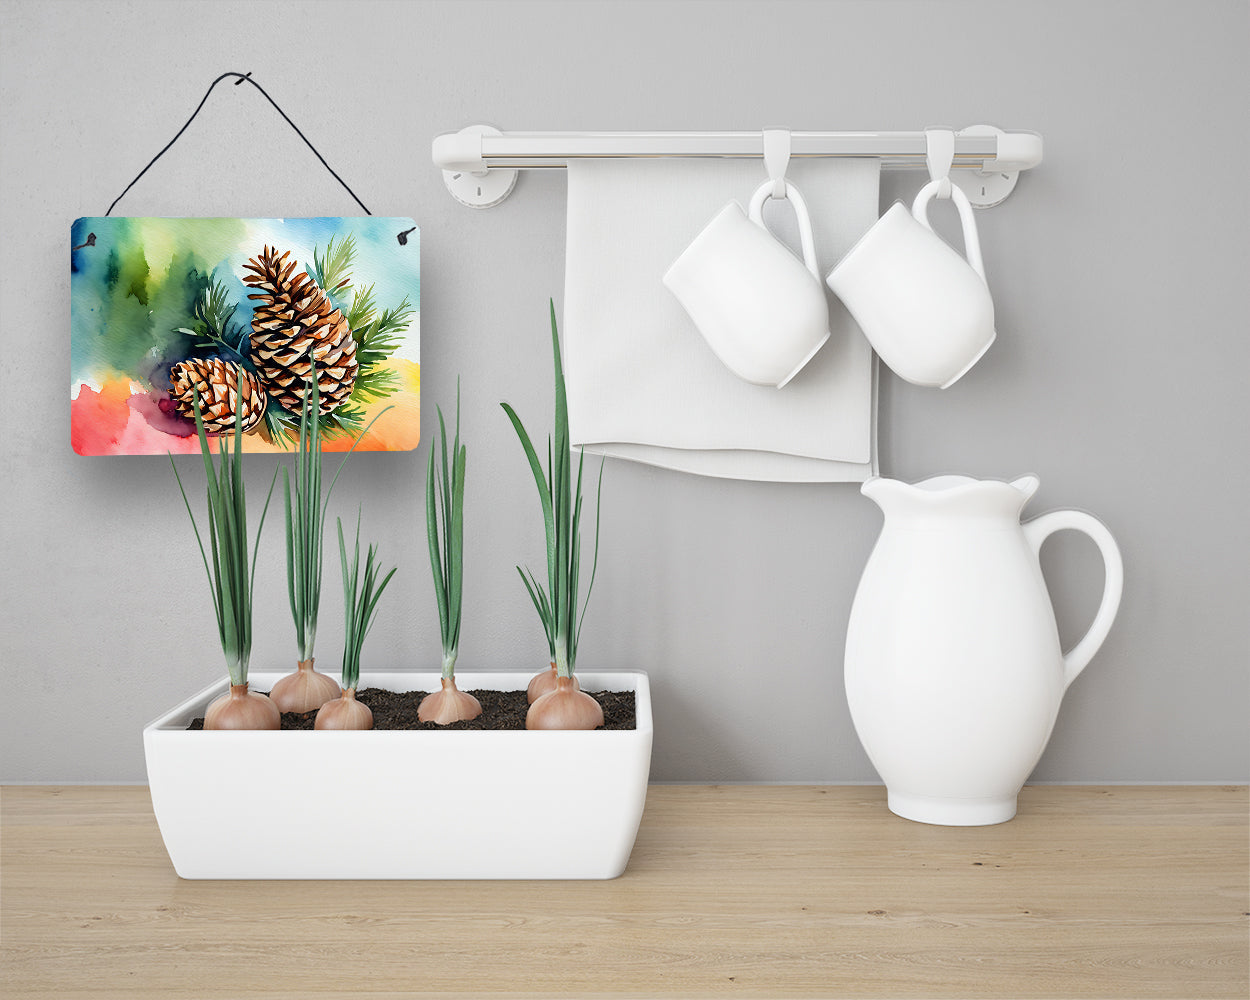 Maine White Pine Cone and Tassels in Watercolor Wall or Door Hanging Prints